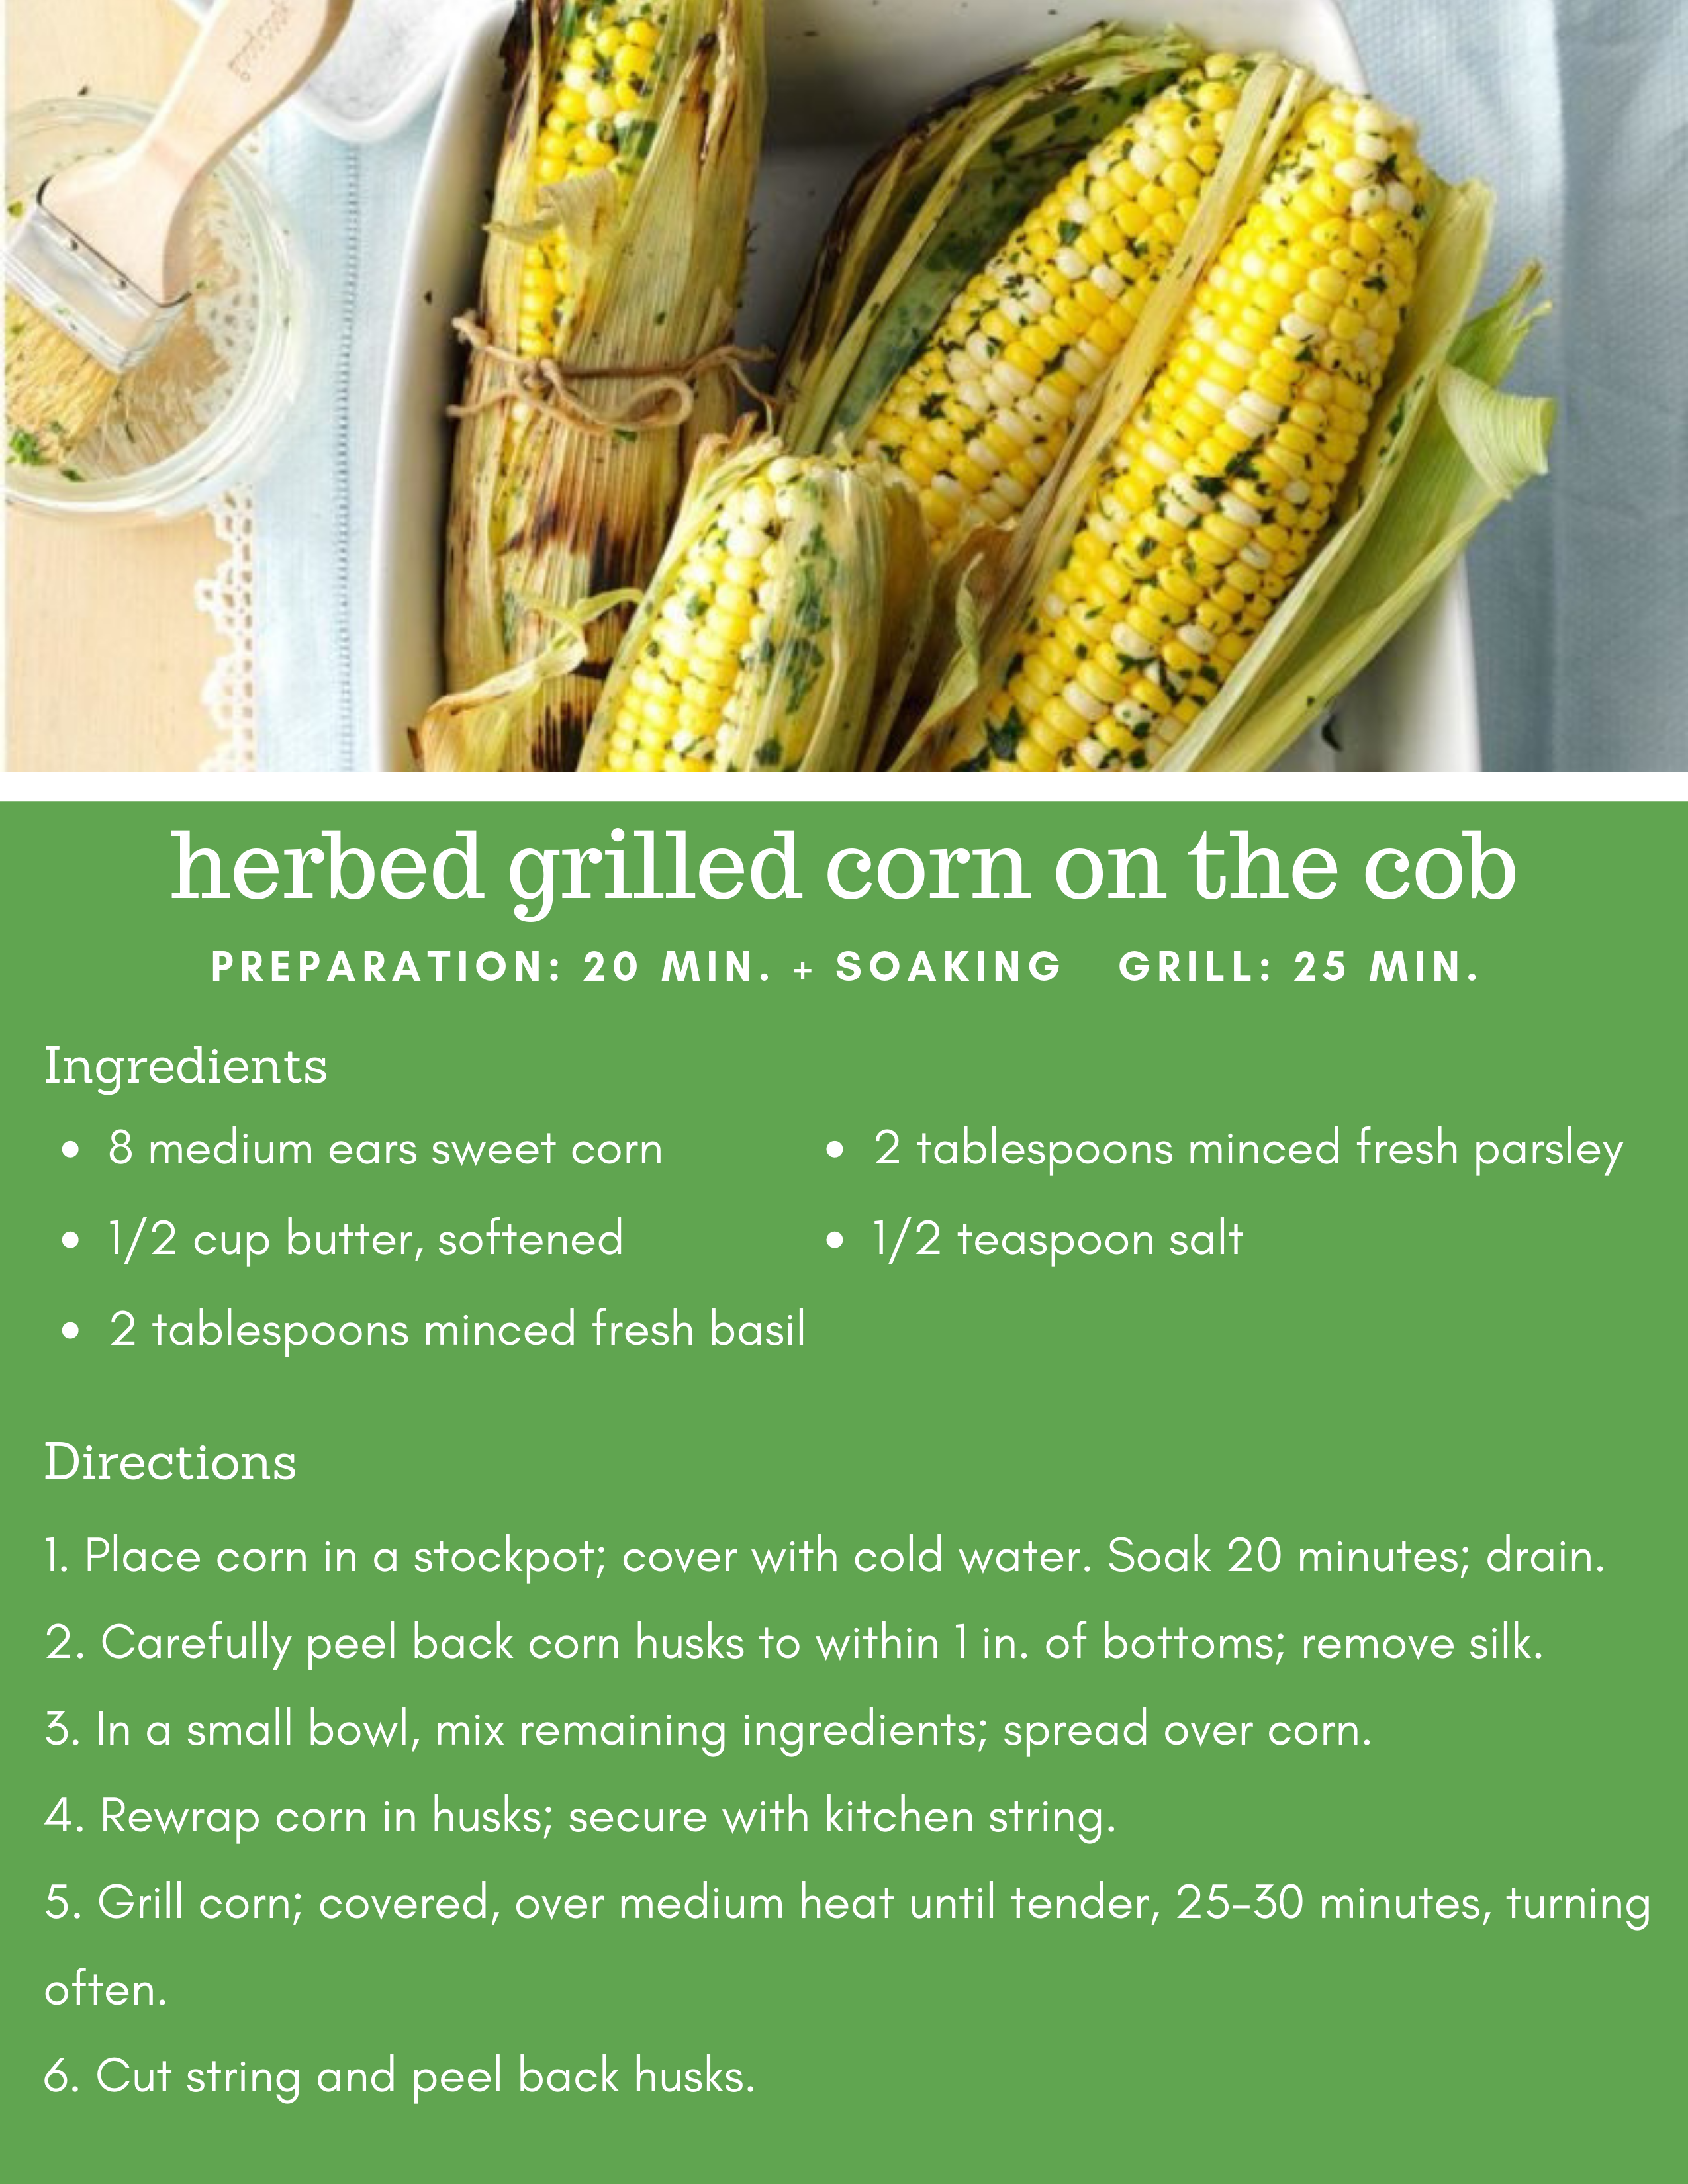 Herb Grilled Corn on the Cob